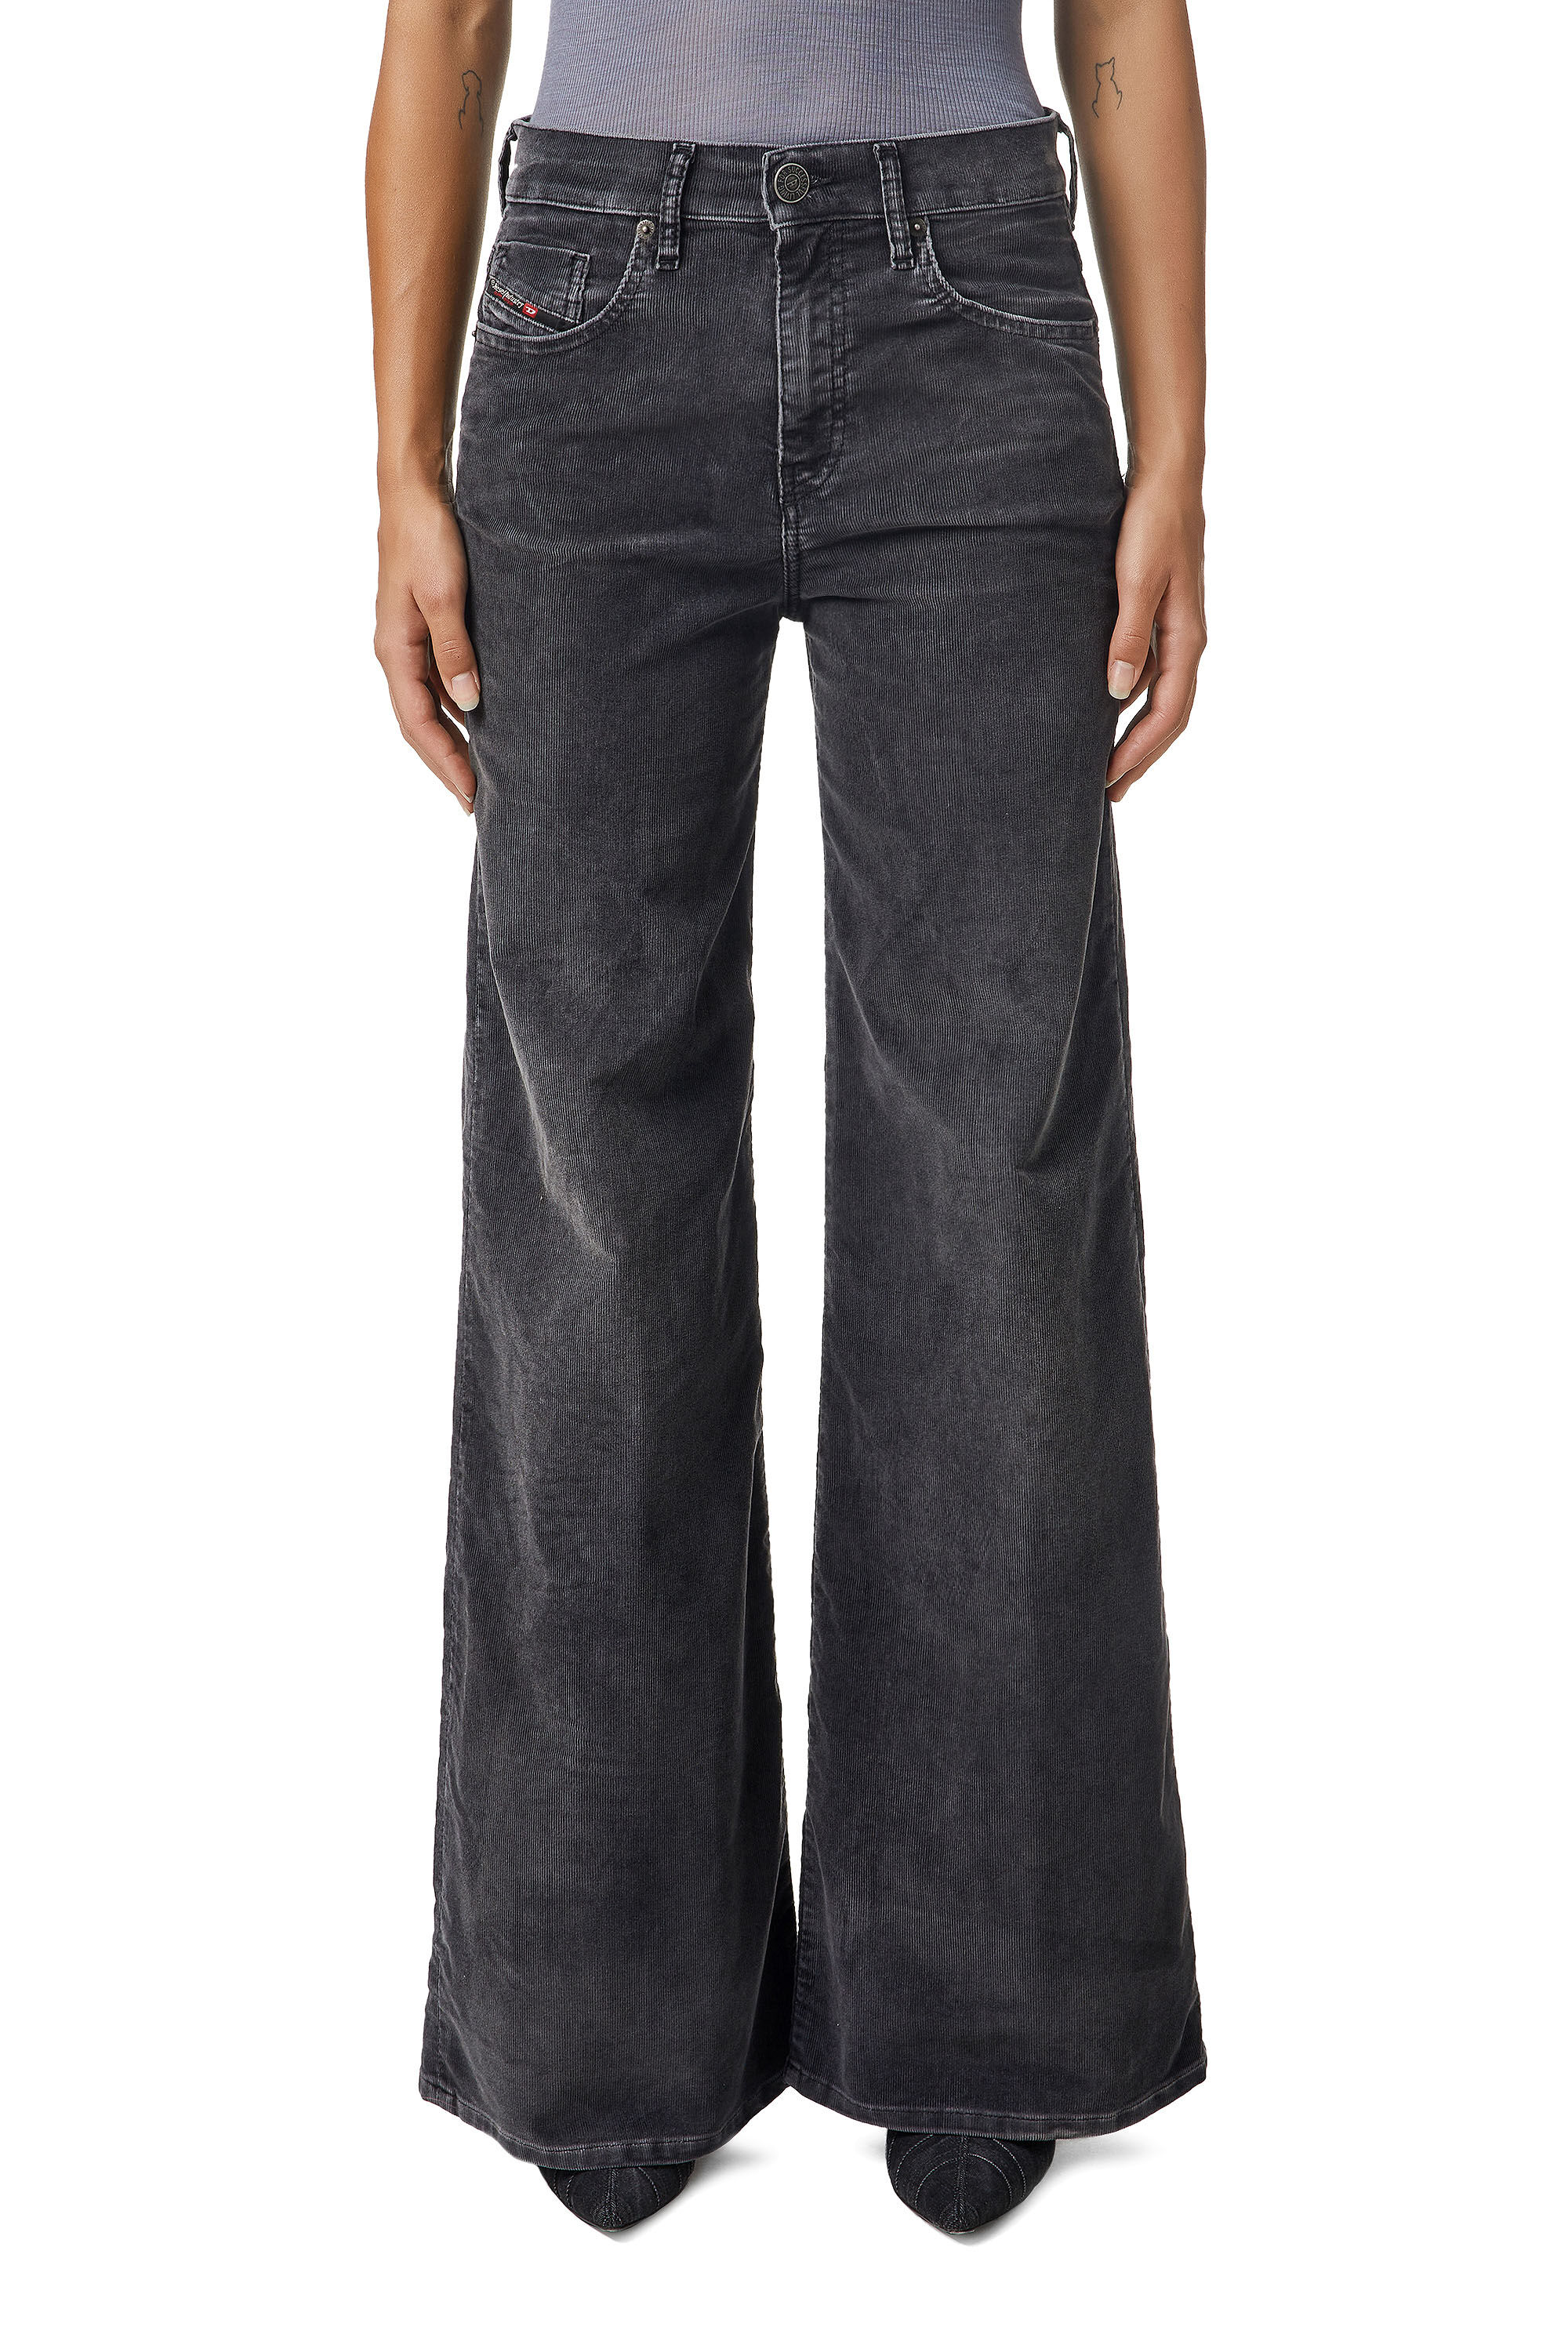 Diesel - D-Akemi 069YA Bootcut and Flare Jeans,  - Image 3